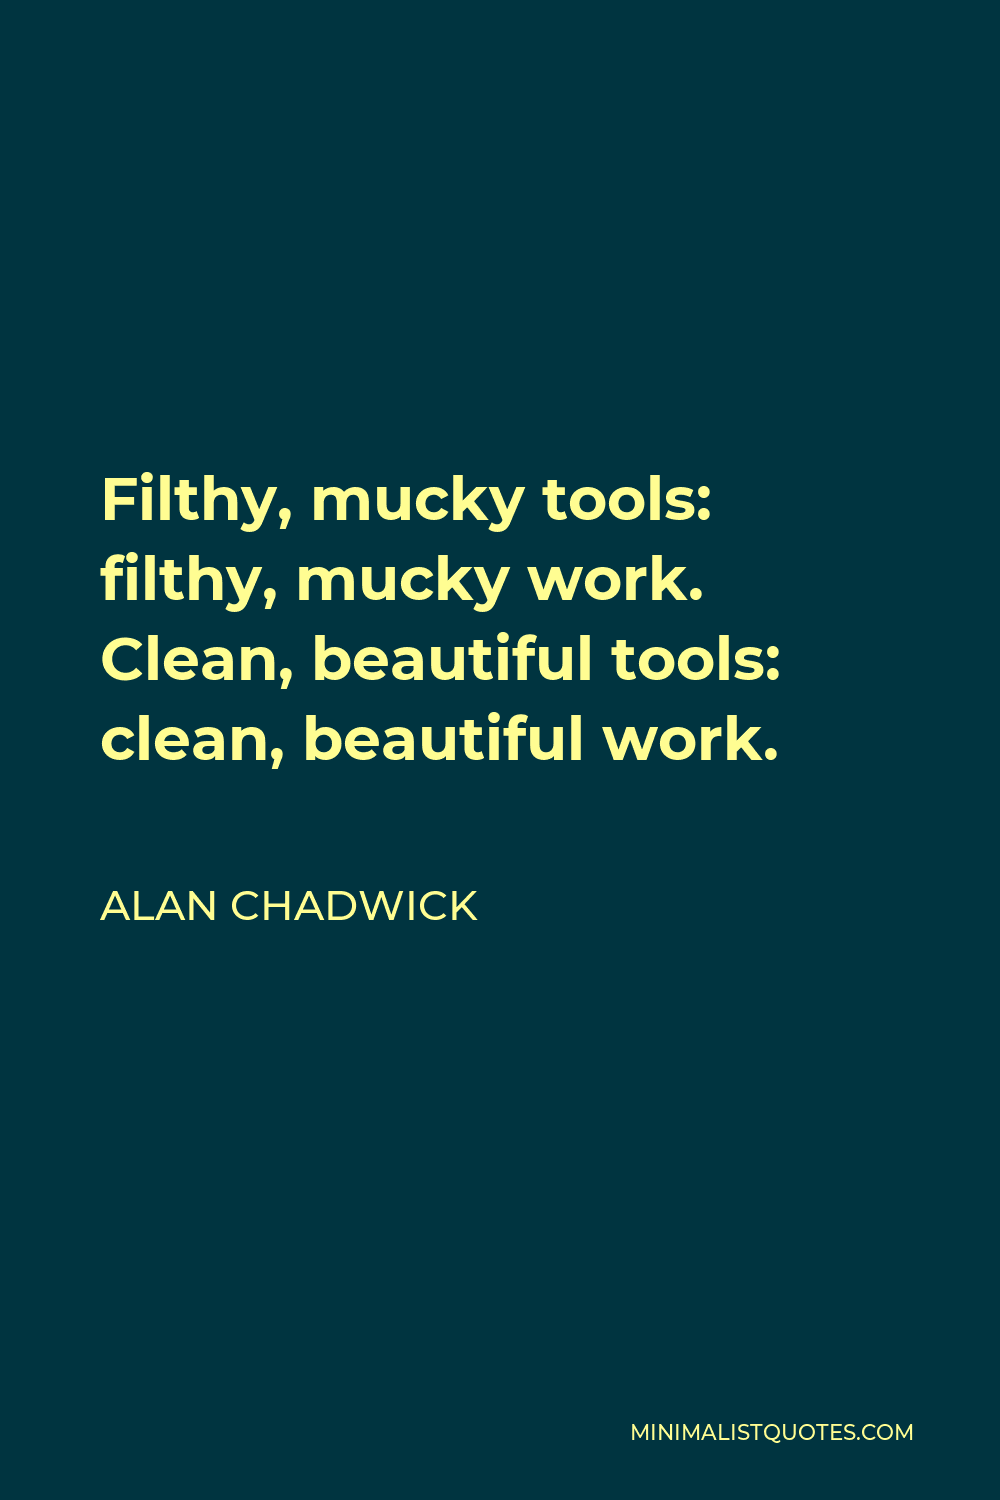 Alan Chadwick Quote - Filthy, mucky tools: filthy, mucky work. Clean, beautiful tools: clean, beautiful work.